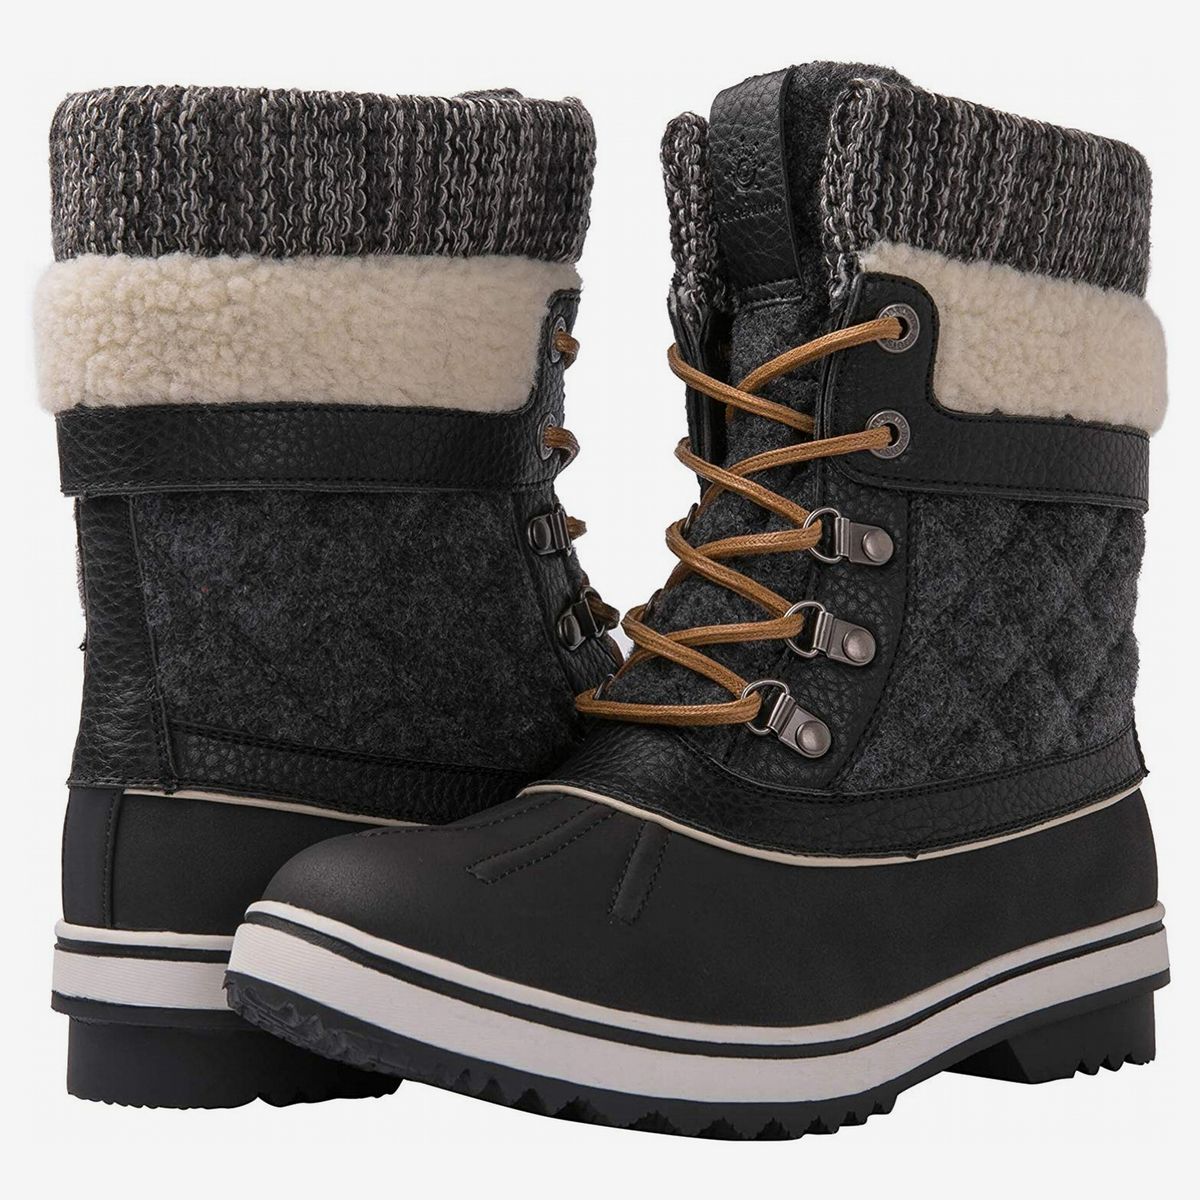 most comfortable winter shoes for walking